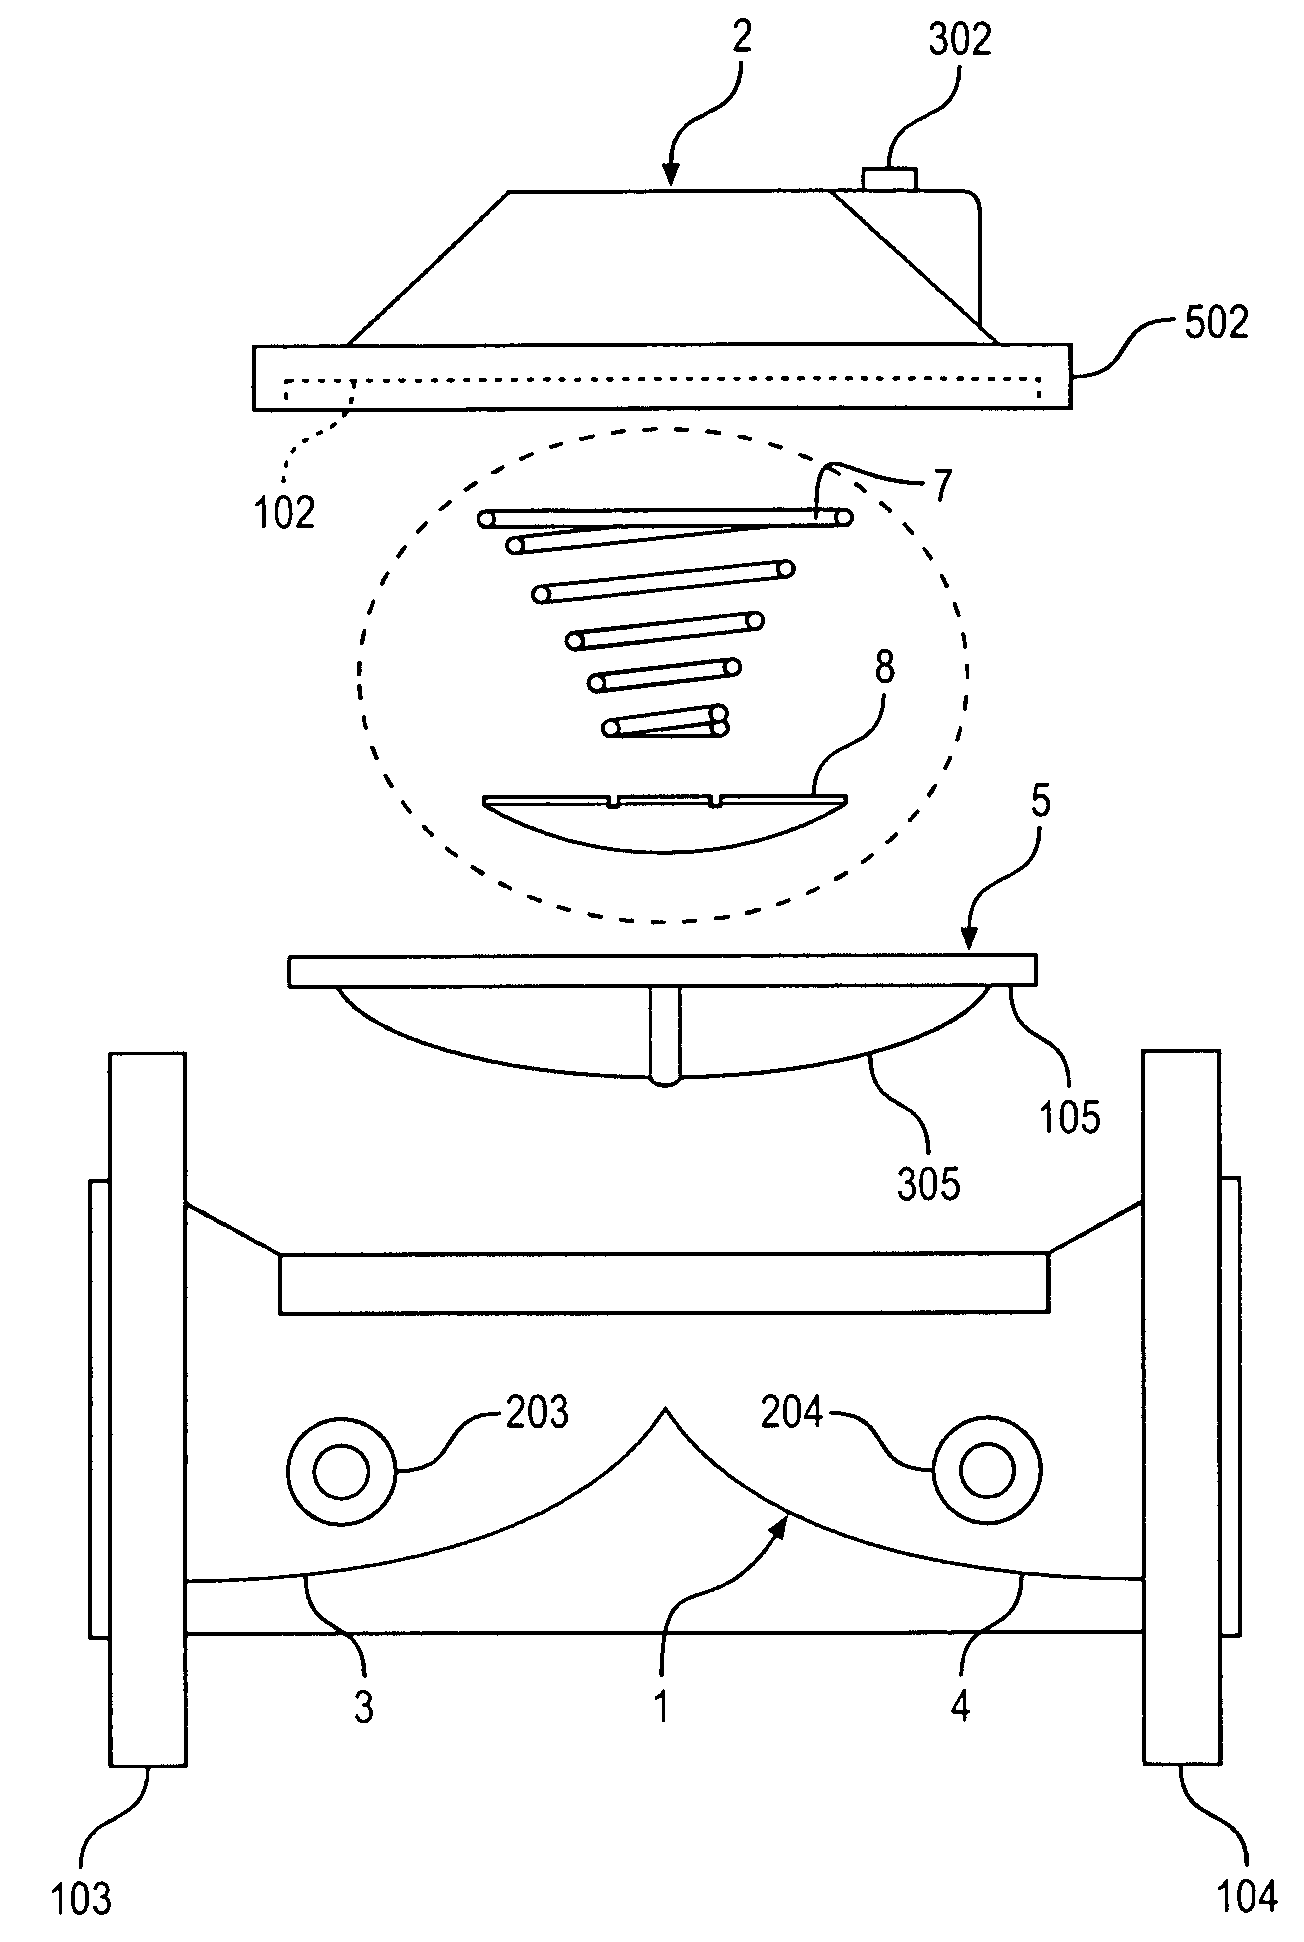 Diaphargm valve and open close element for said valve